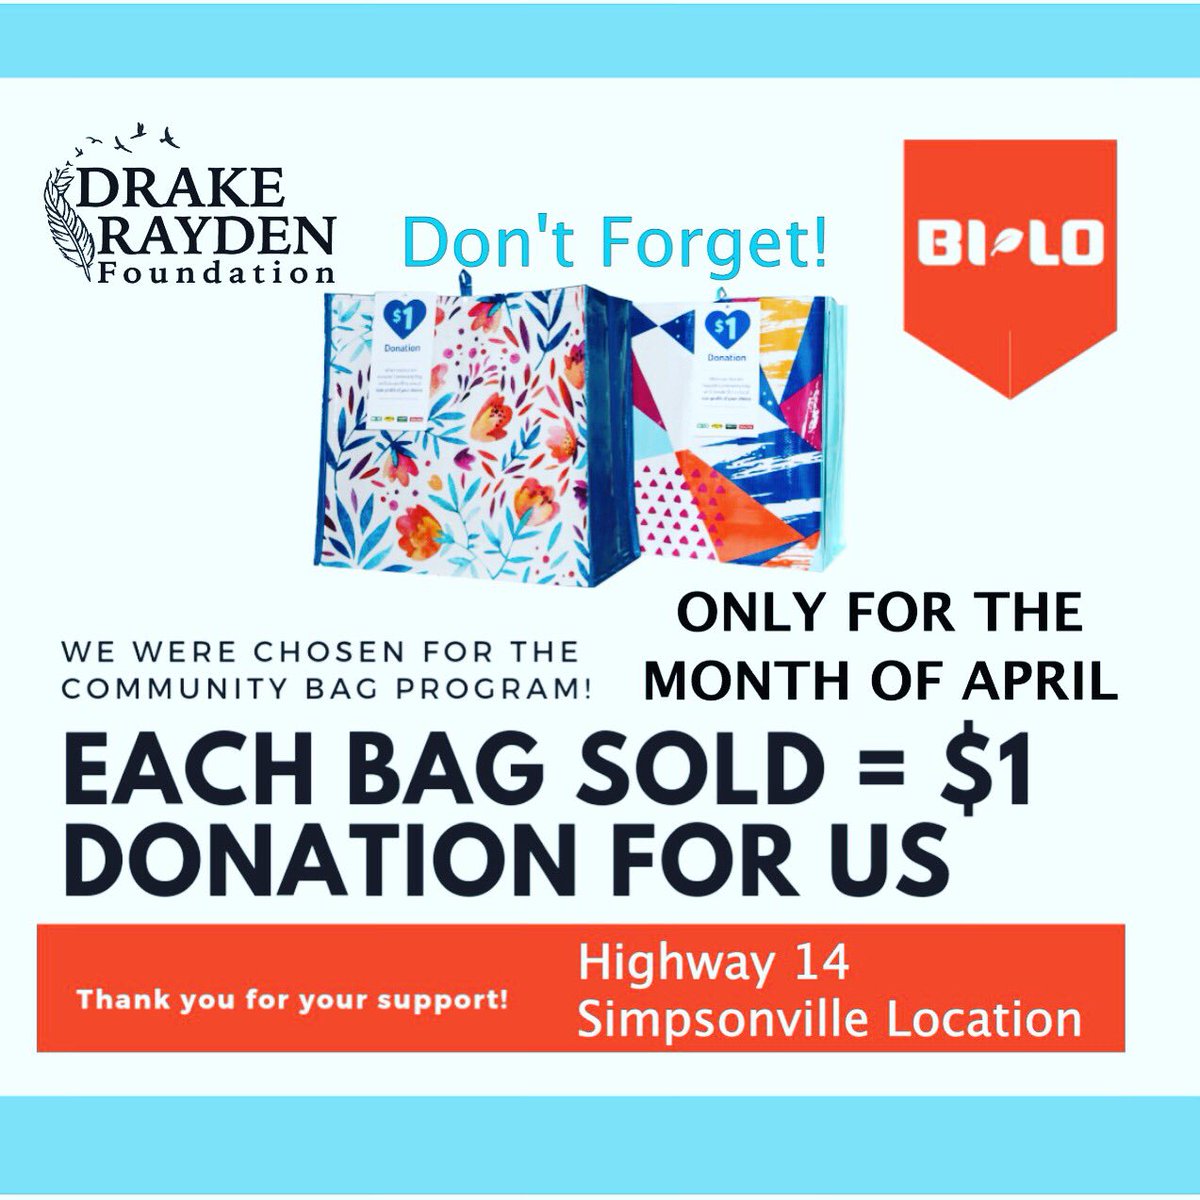 Grab your Bag today! 

We were chosen for the month of April for the charity of the month at 
BiLo off Highway 14 Simpsonville!!!! 

#Grabyourbag, #Cureisinthebag, #Onestoneatatime, #FindingACure4NKH, #HEisEnough, #AprilOnly, #DRF, #SavingDrake